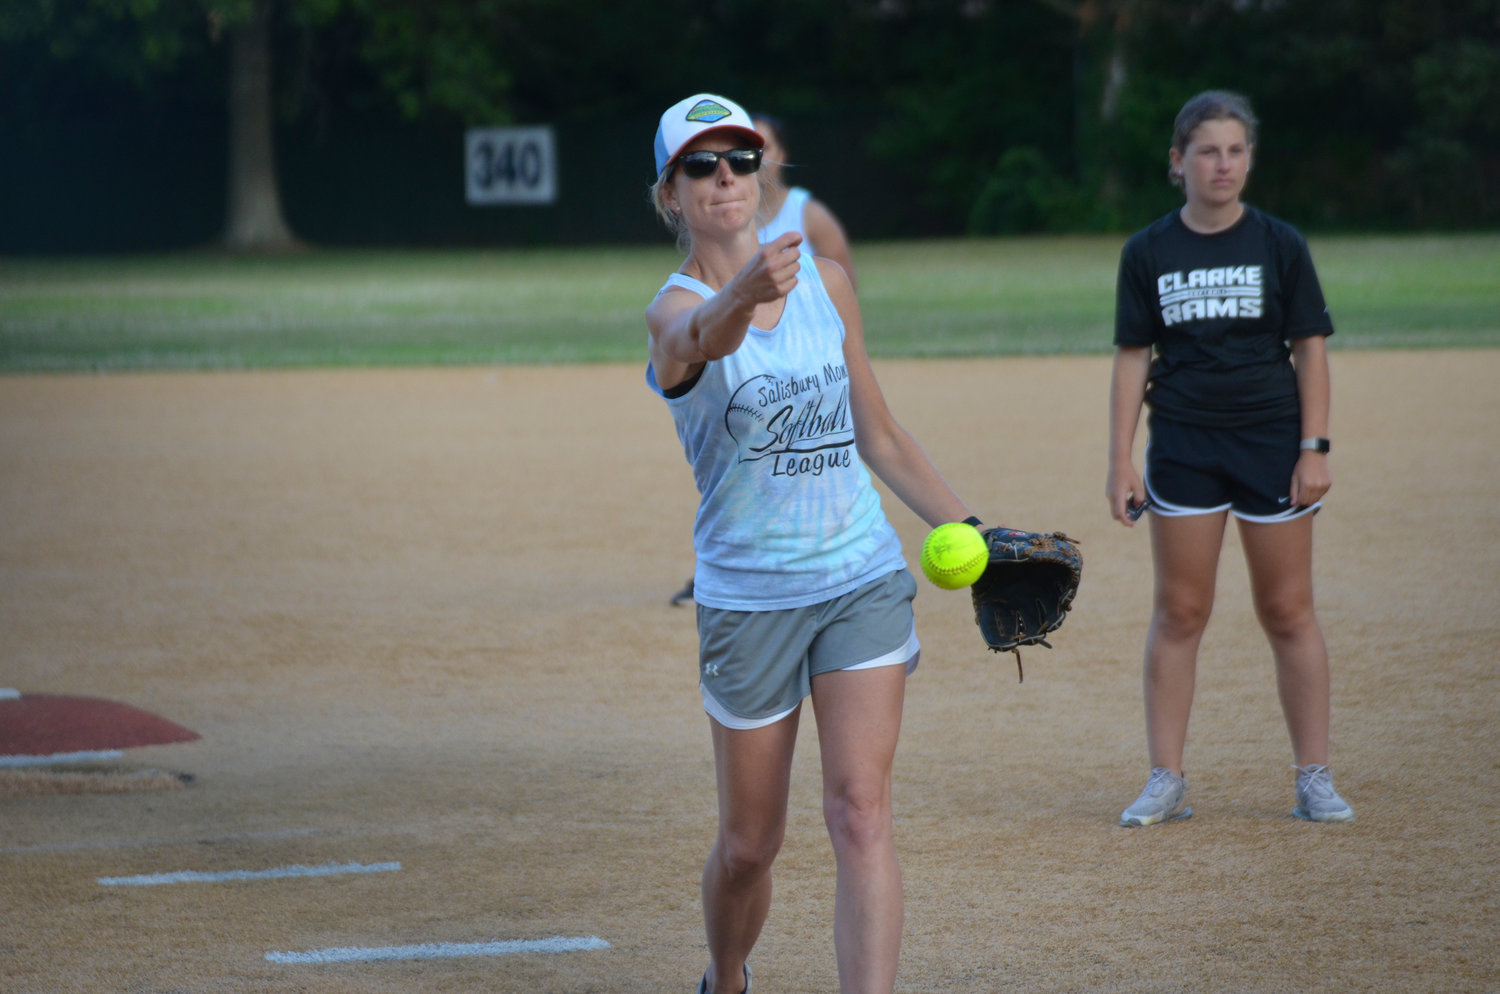 Kelsey Klimkowski pitches out a ball for their softball game on July 7 as Sydney Follick from W.T. Clarke High School umpires behind her.